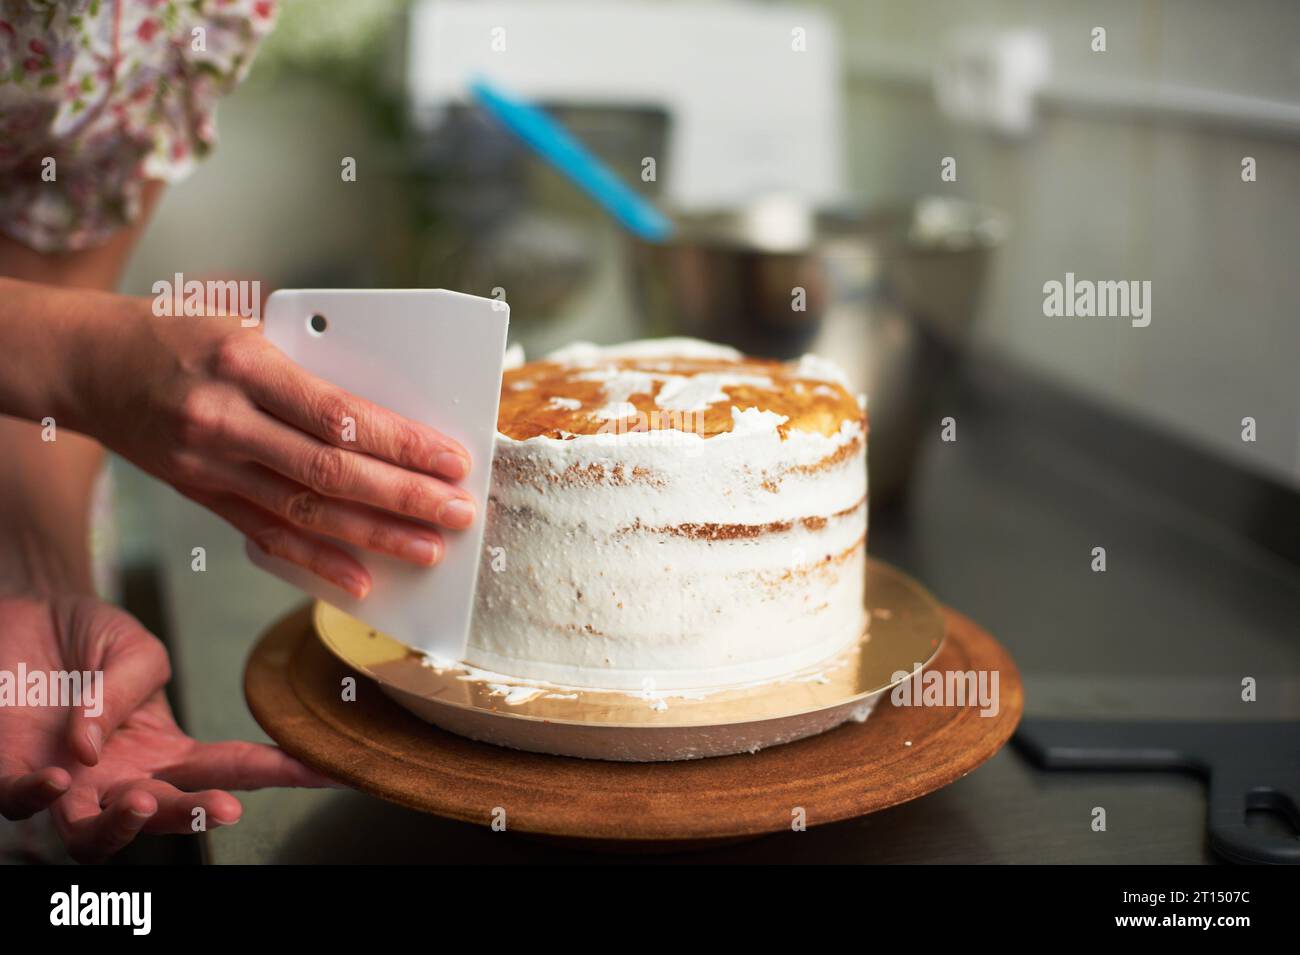 spreading cream cake. kitchen and tools in the background Stock Photo